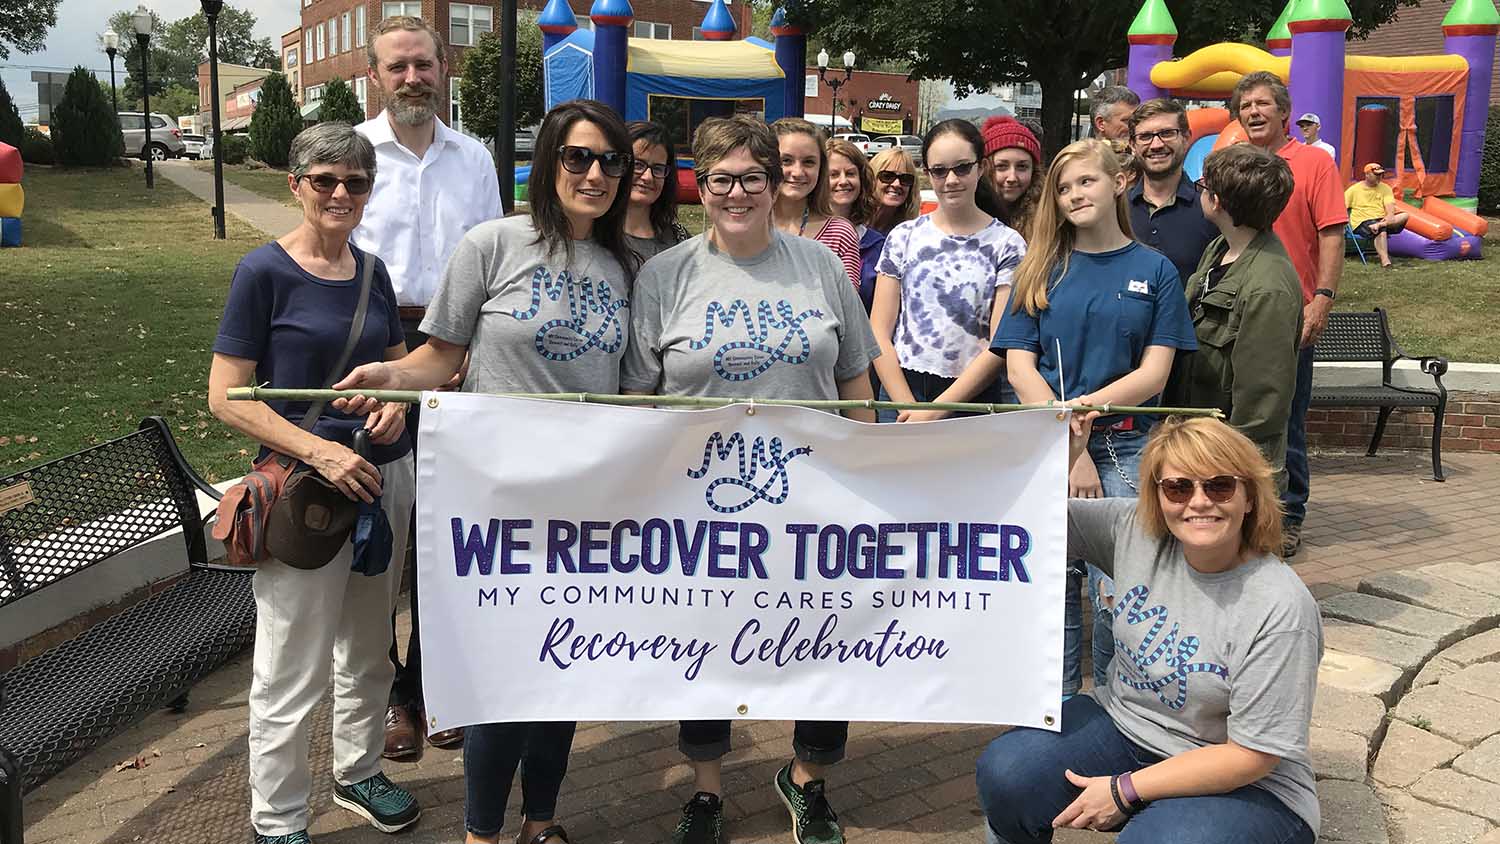 Group holding a "We Recover Together" banner